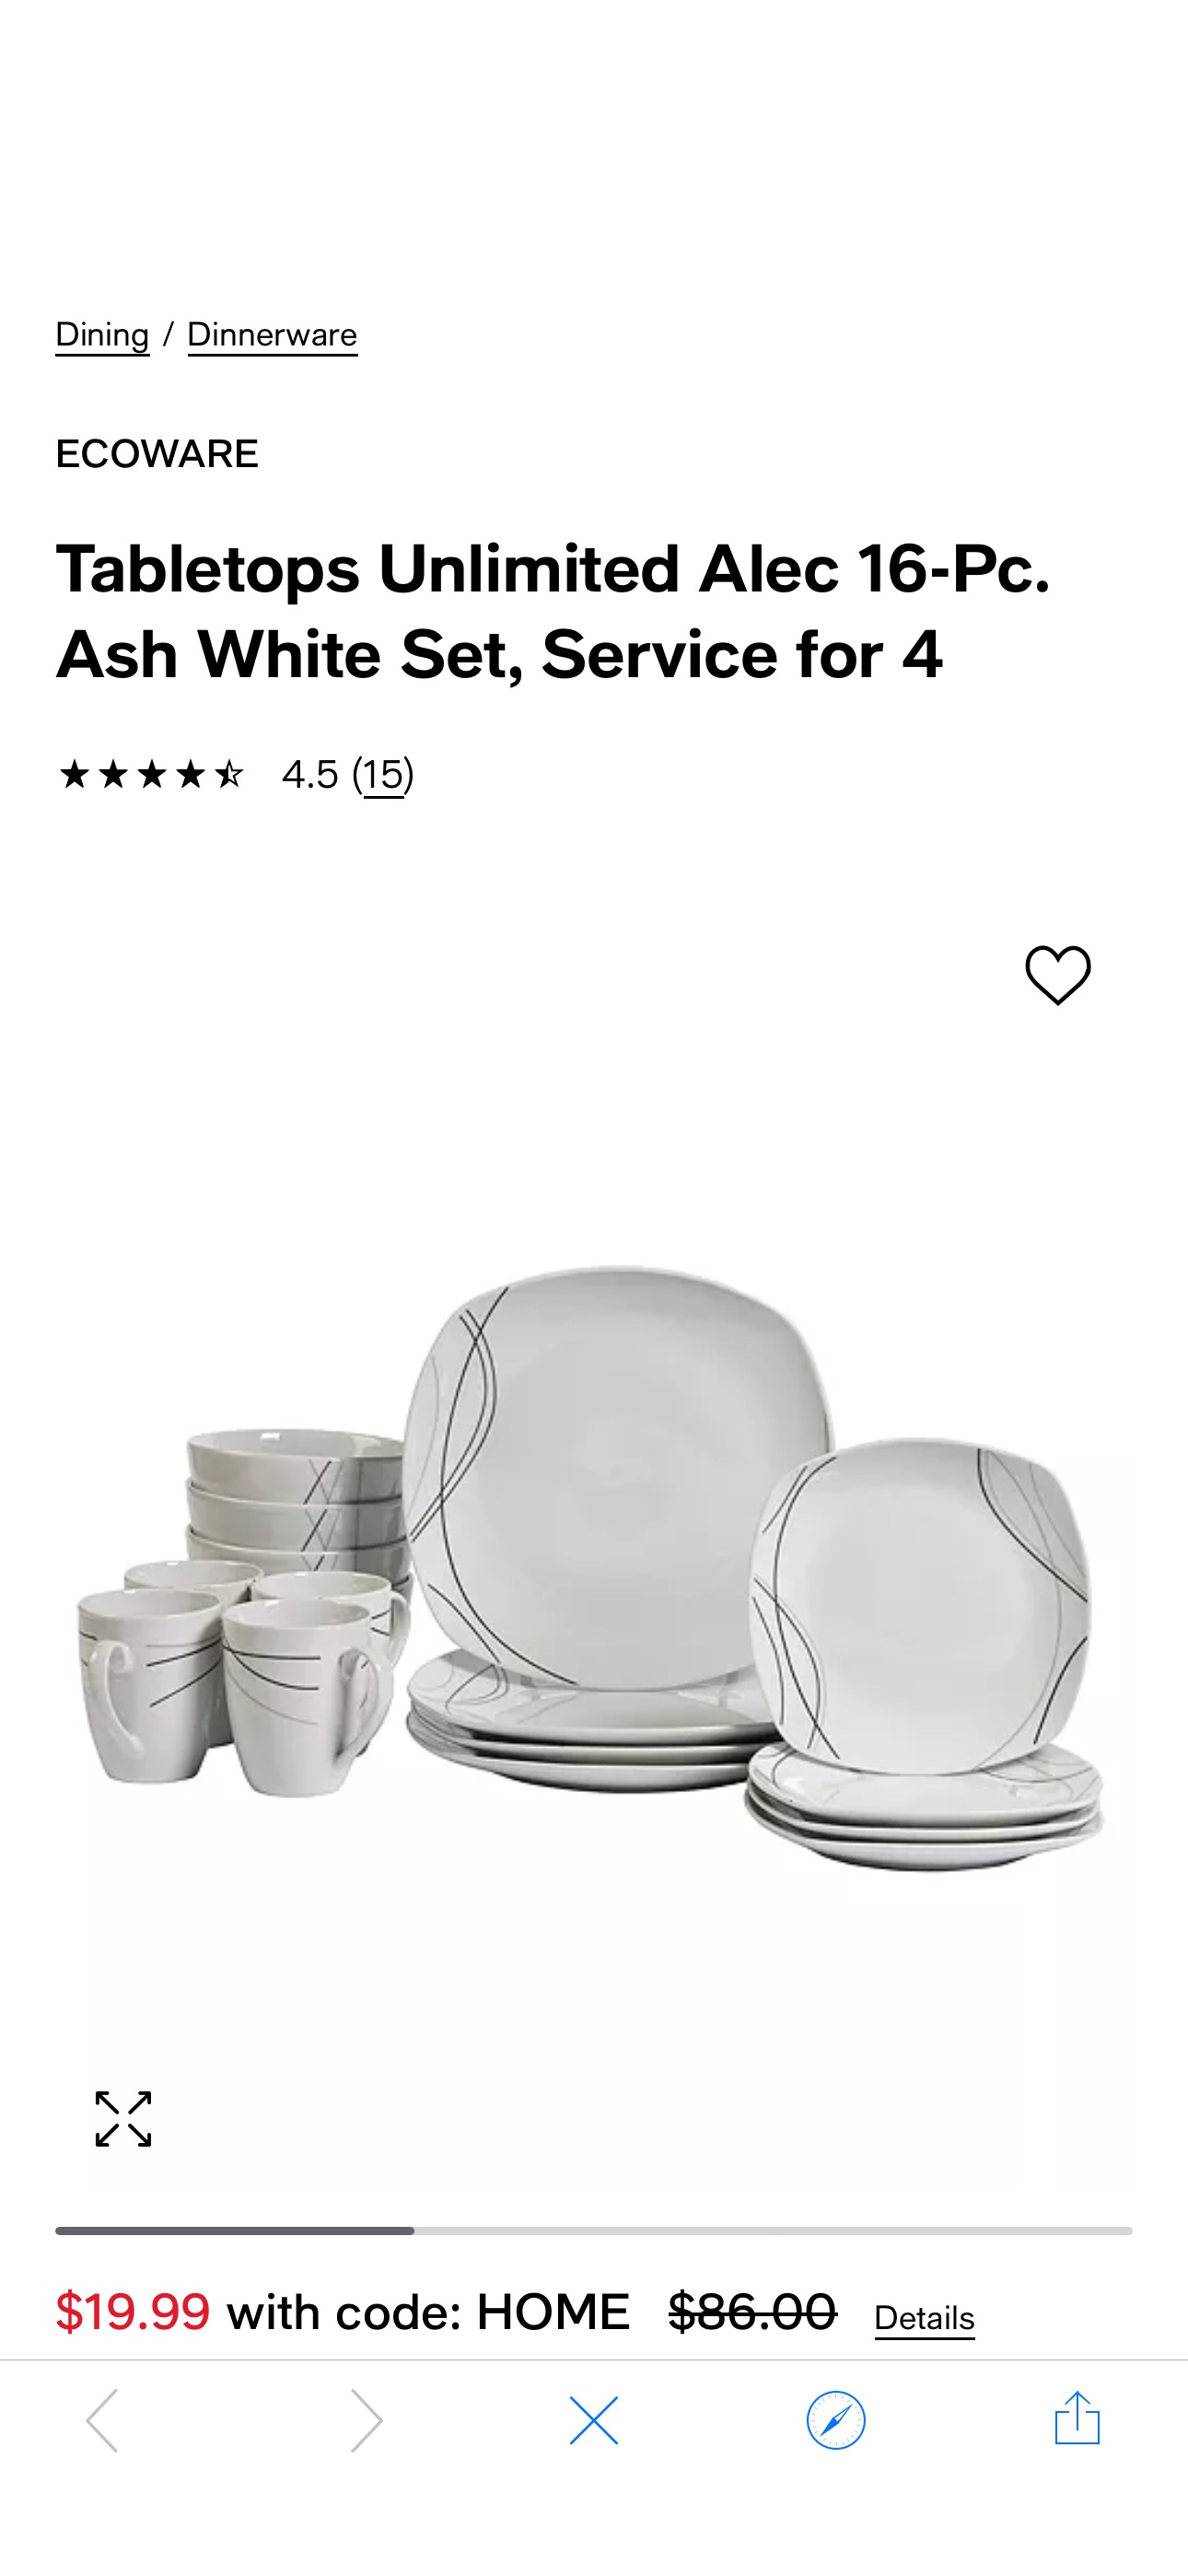 Ecoware Tabletops Unlimited Alec 16-Pc. Ash White Set, Service for 4 & Reviews - Dinnerware - Dining - Macy's 折扣码 HOME